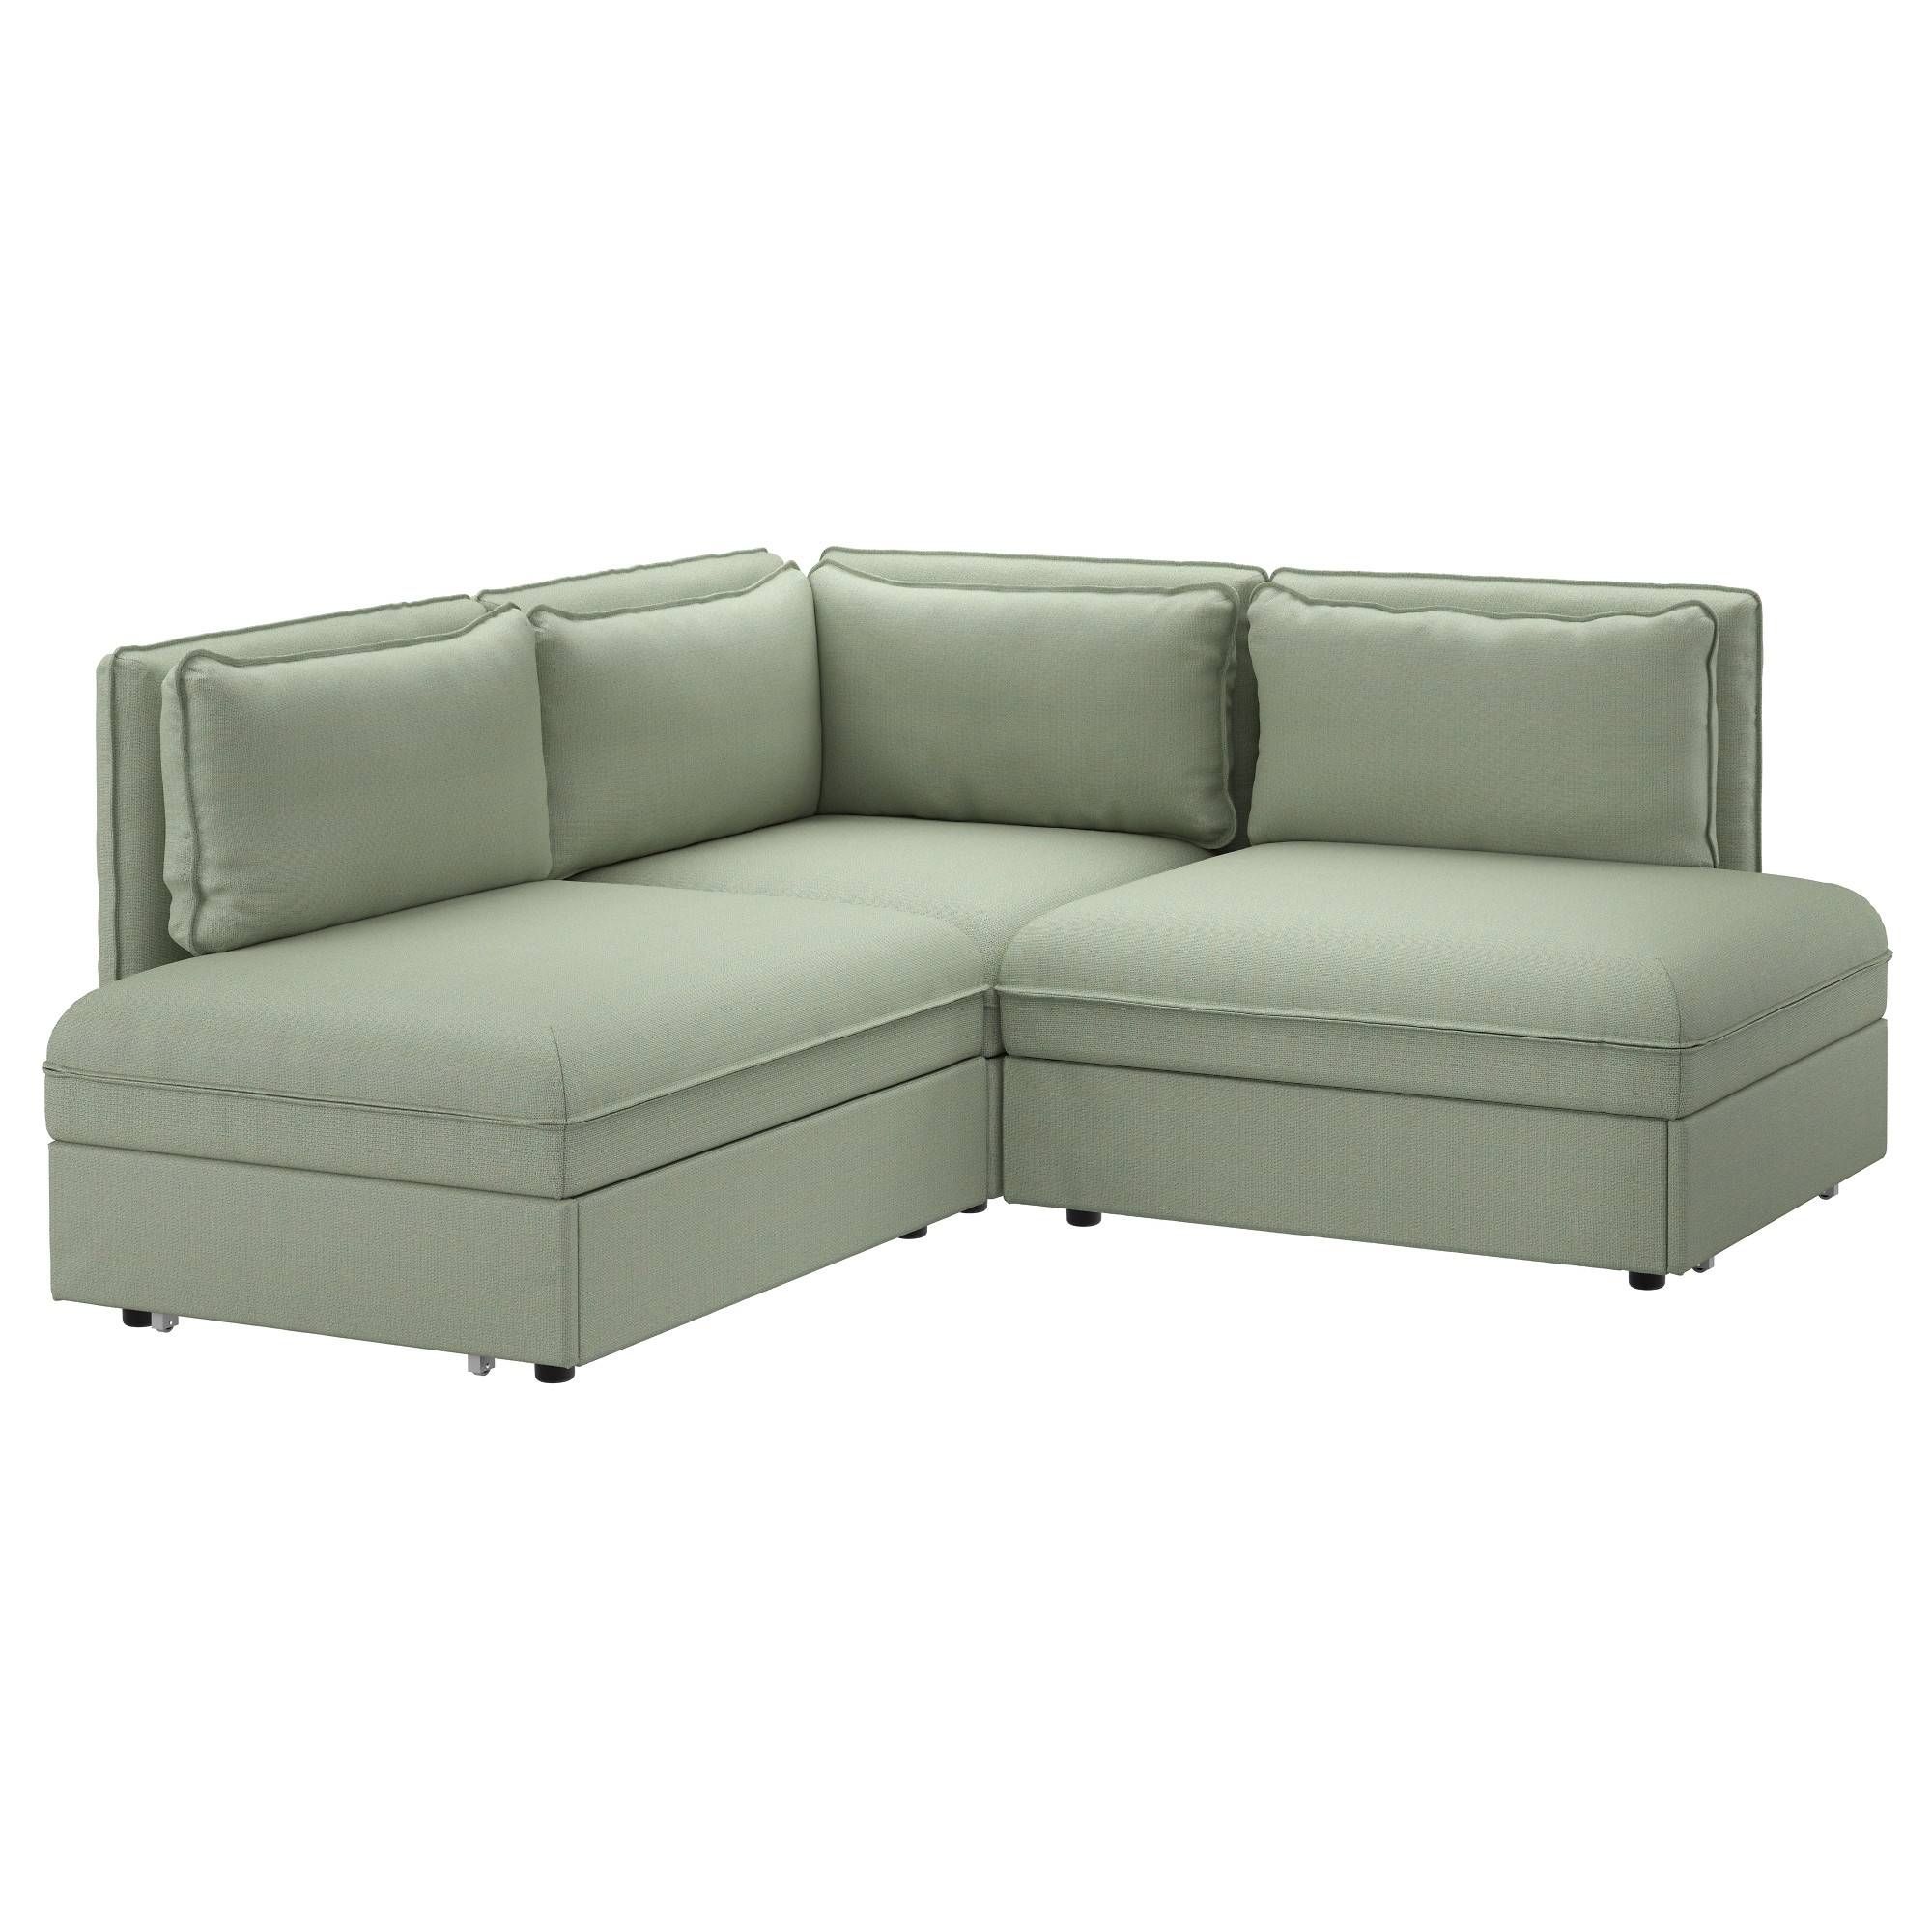 Vallentuna Sleeper Sectional, 2 Seat – Orrsta Beige/hillared Green Pertaining To 2 Seat Sectional Sofas (View 24 of 30)